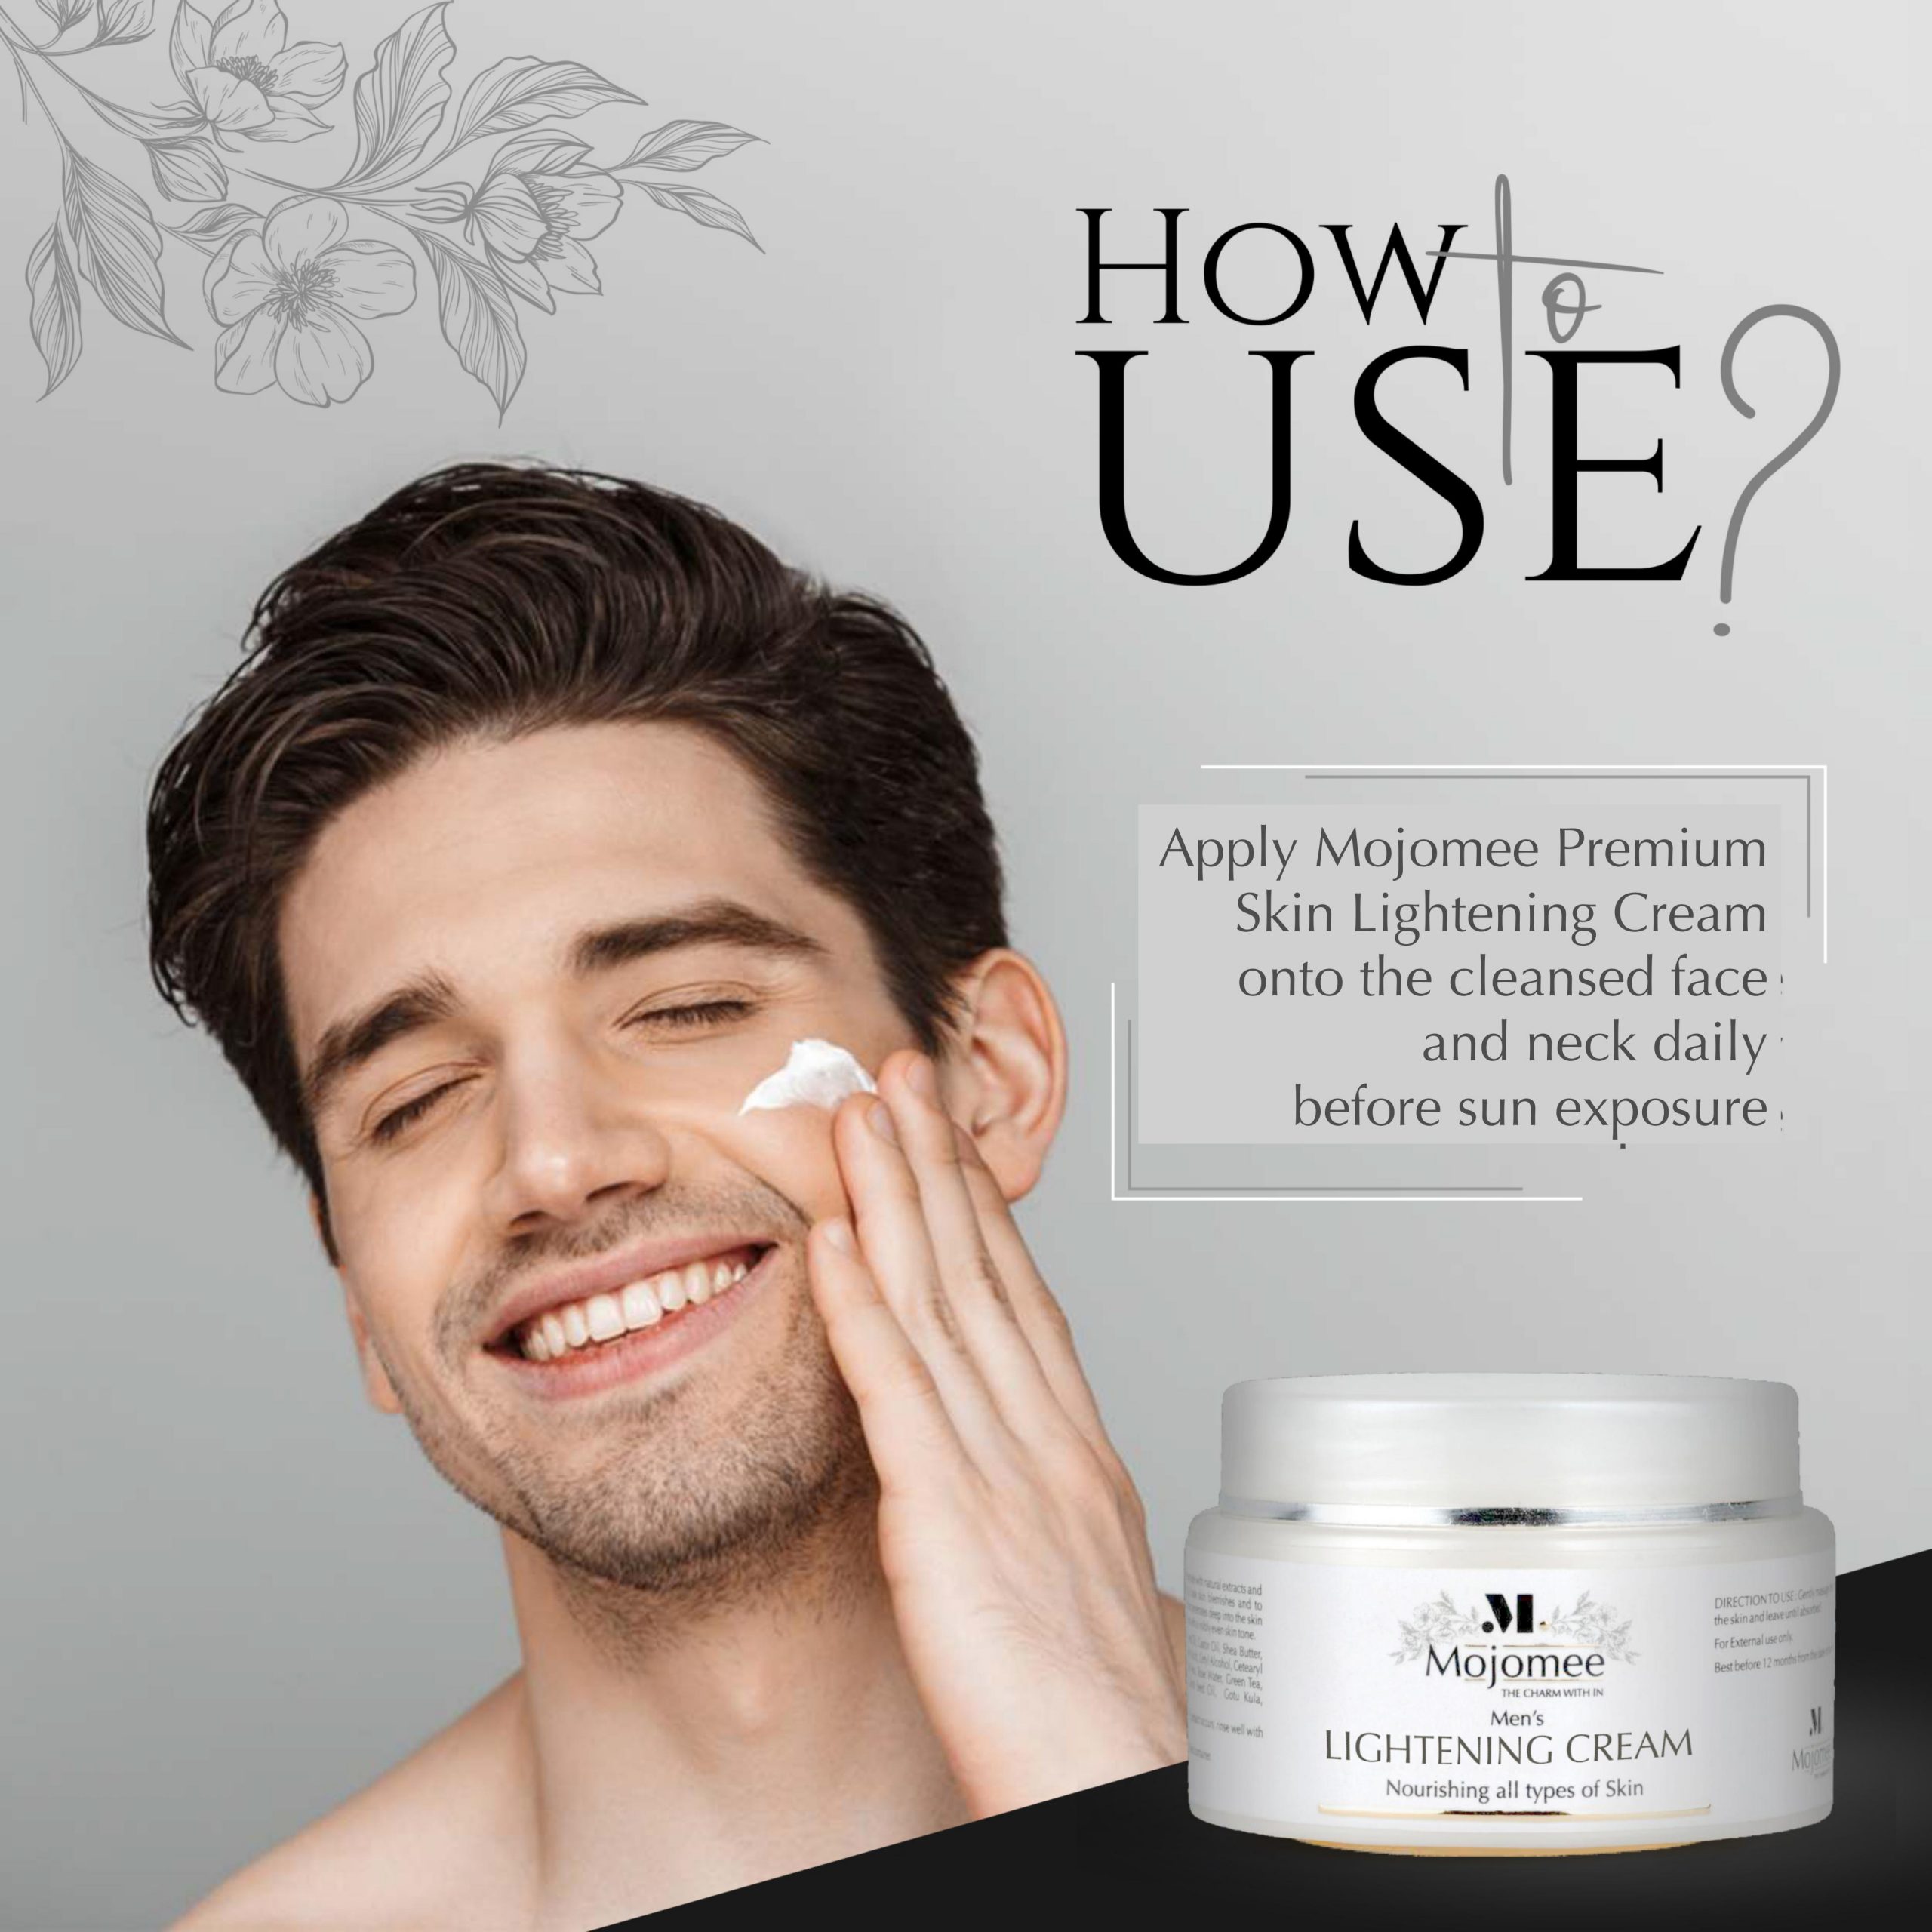 How to use kbw mens cream